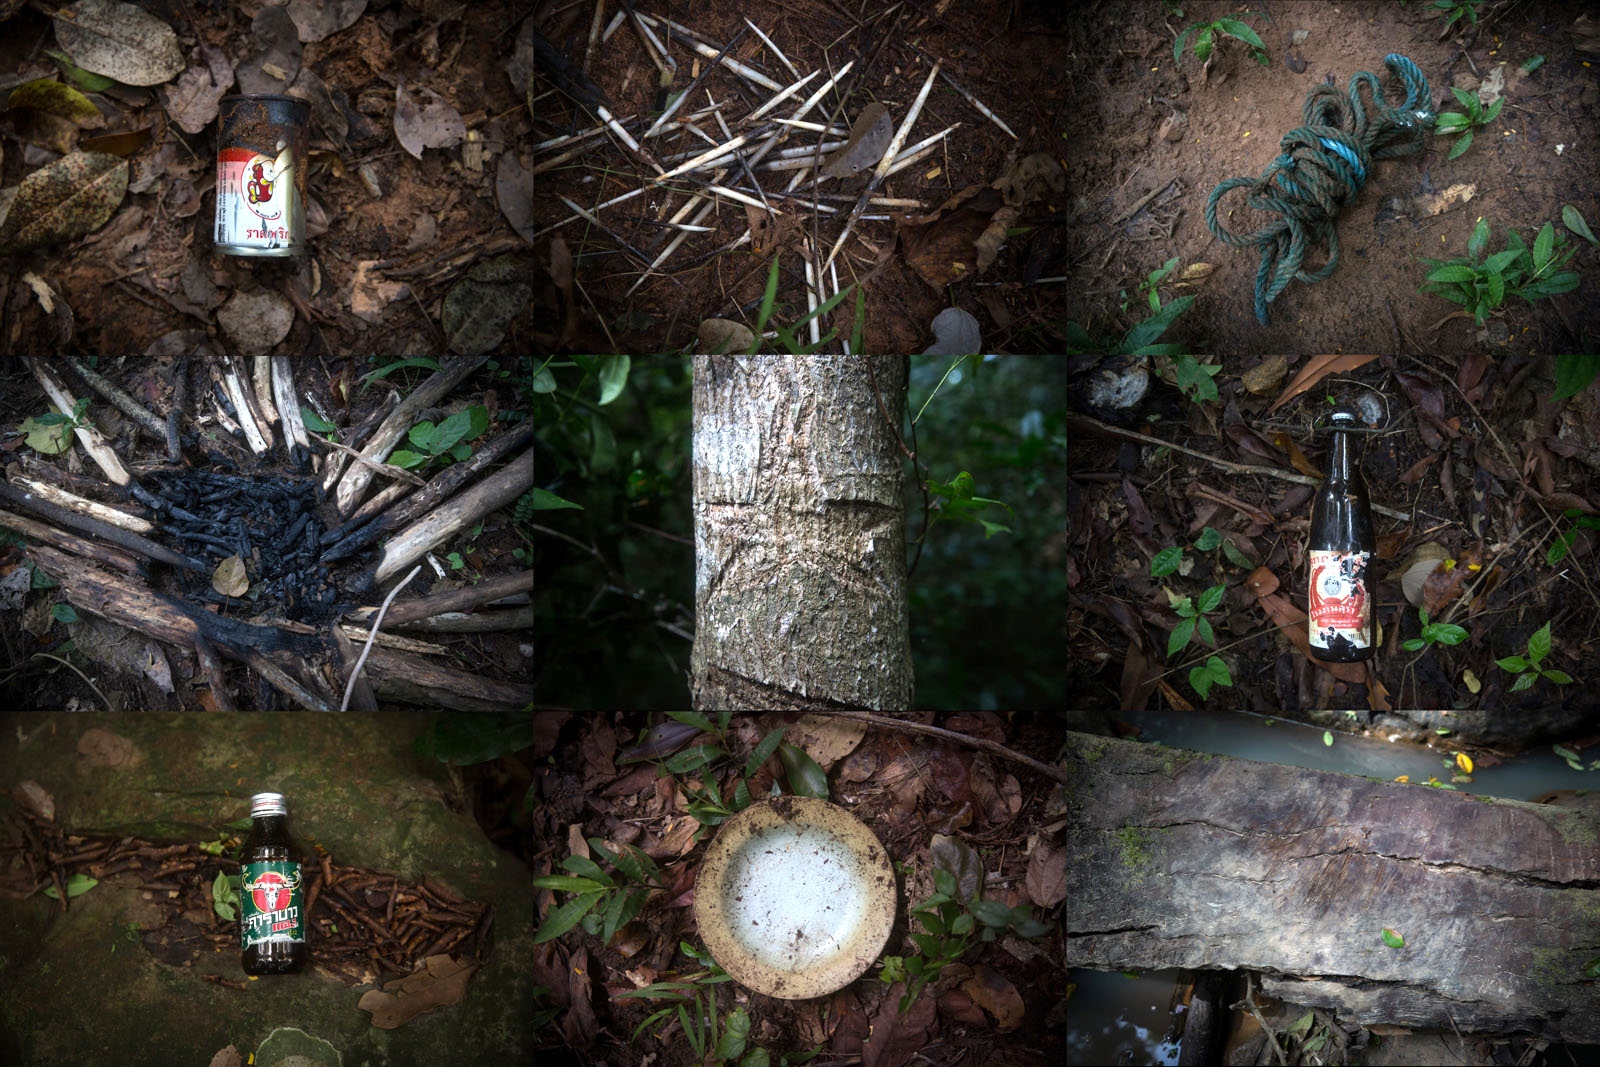 PROTECTING THAILANDS ROSEWOOD - Throughout the forests, rangers look for clues of recent...